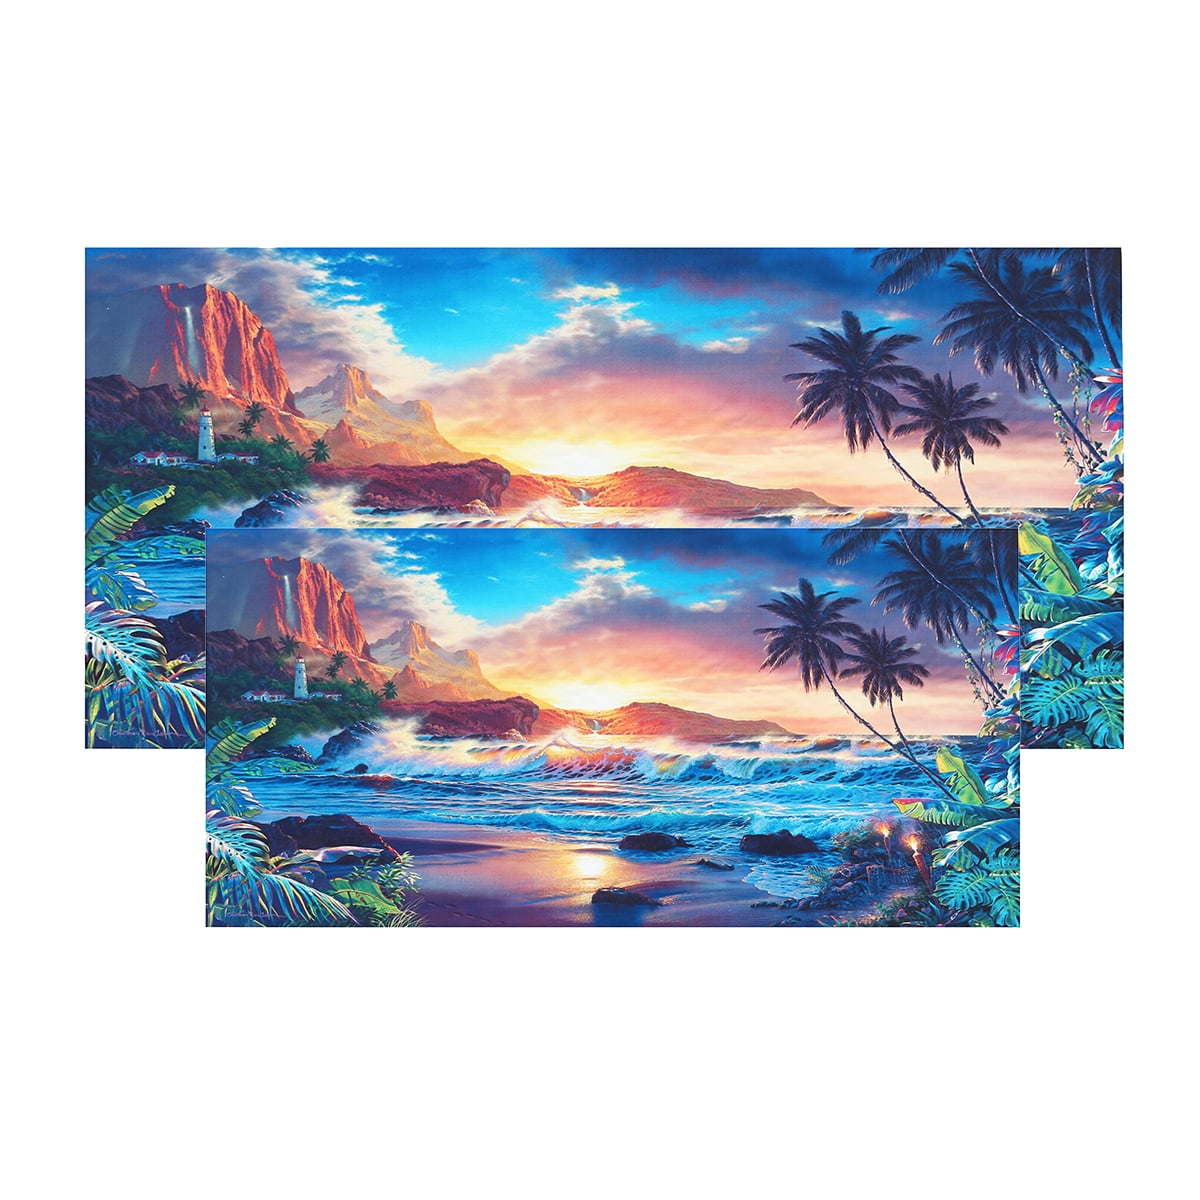 Seascape Wall Art The Red Sunset Clouds All Over the Sky and the Blue Sea Hand-painted Oil Painting Modern Canvas Wall art Red and Blue Wall Decoration Frameless 24 X 24 inch 60 X 60 cm